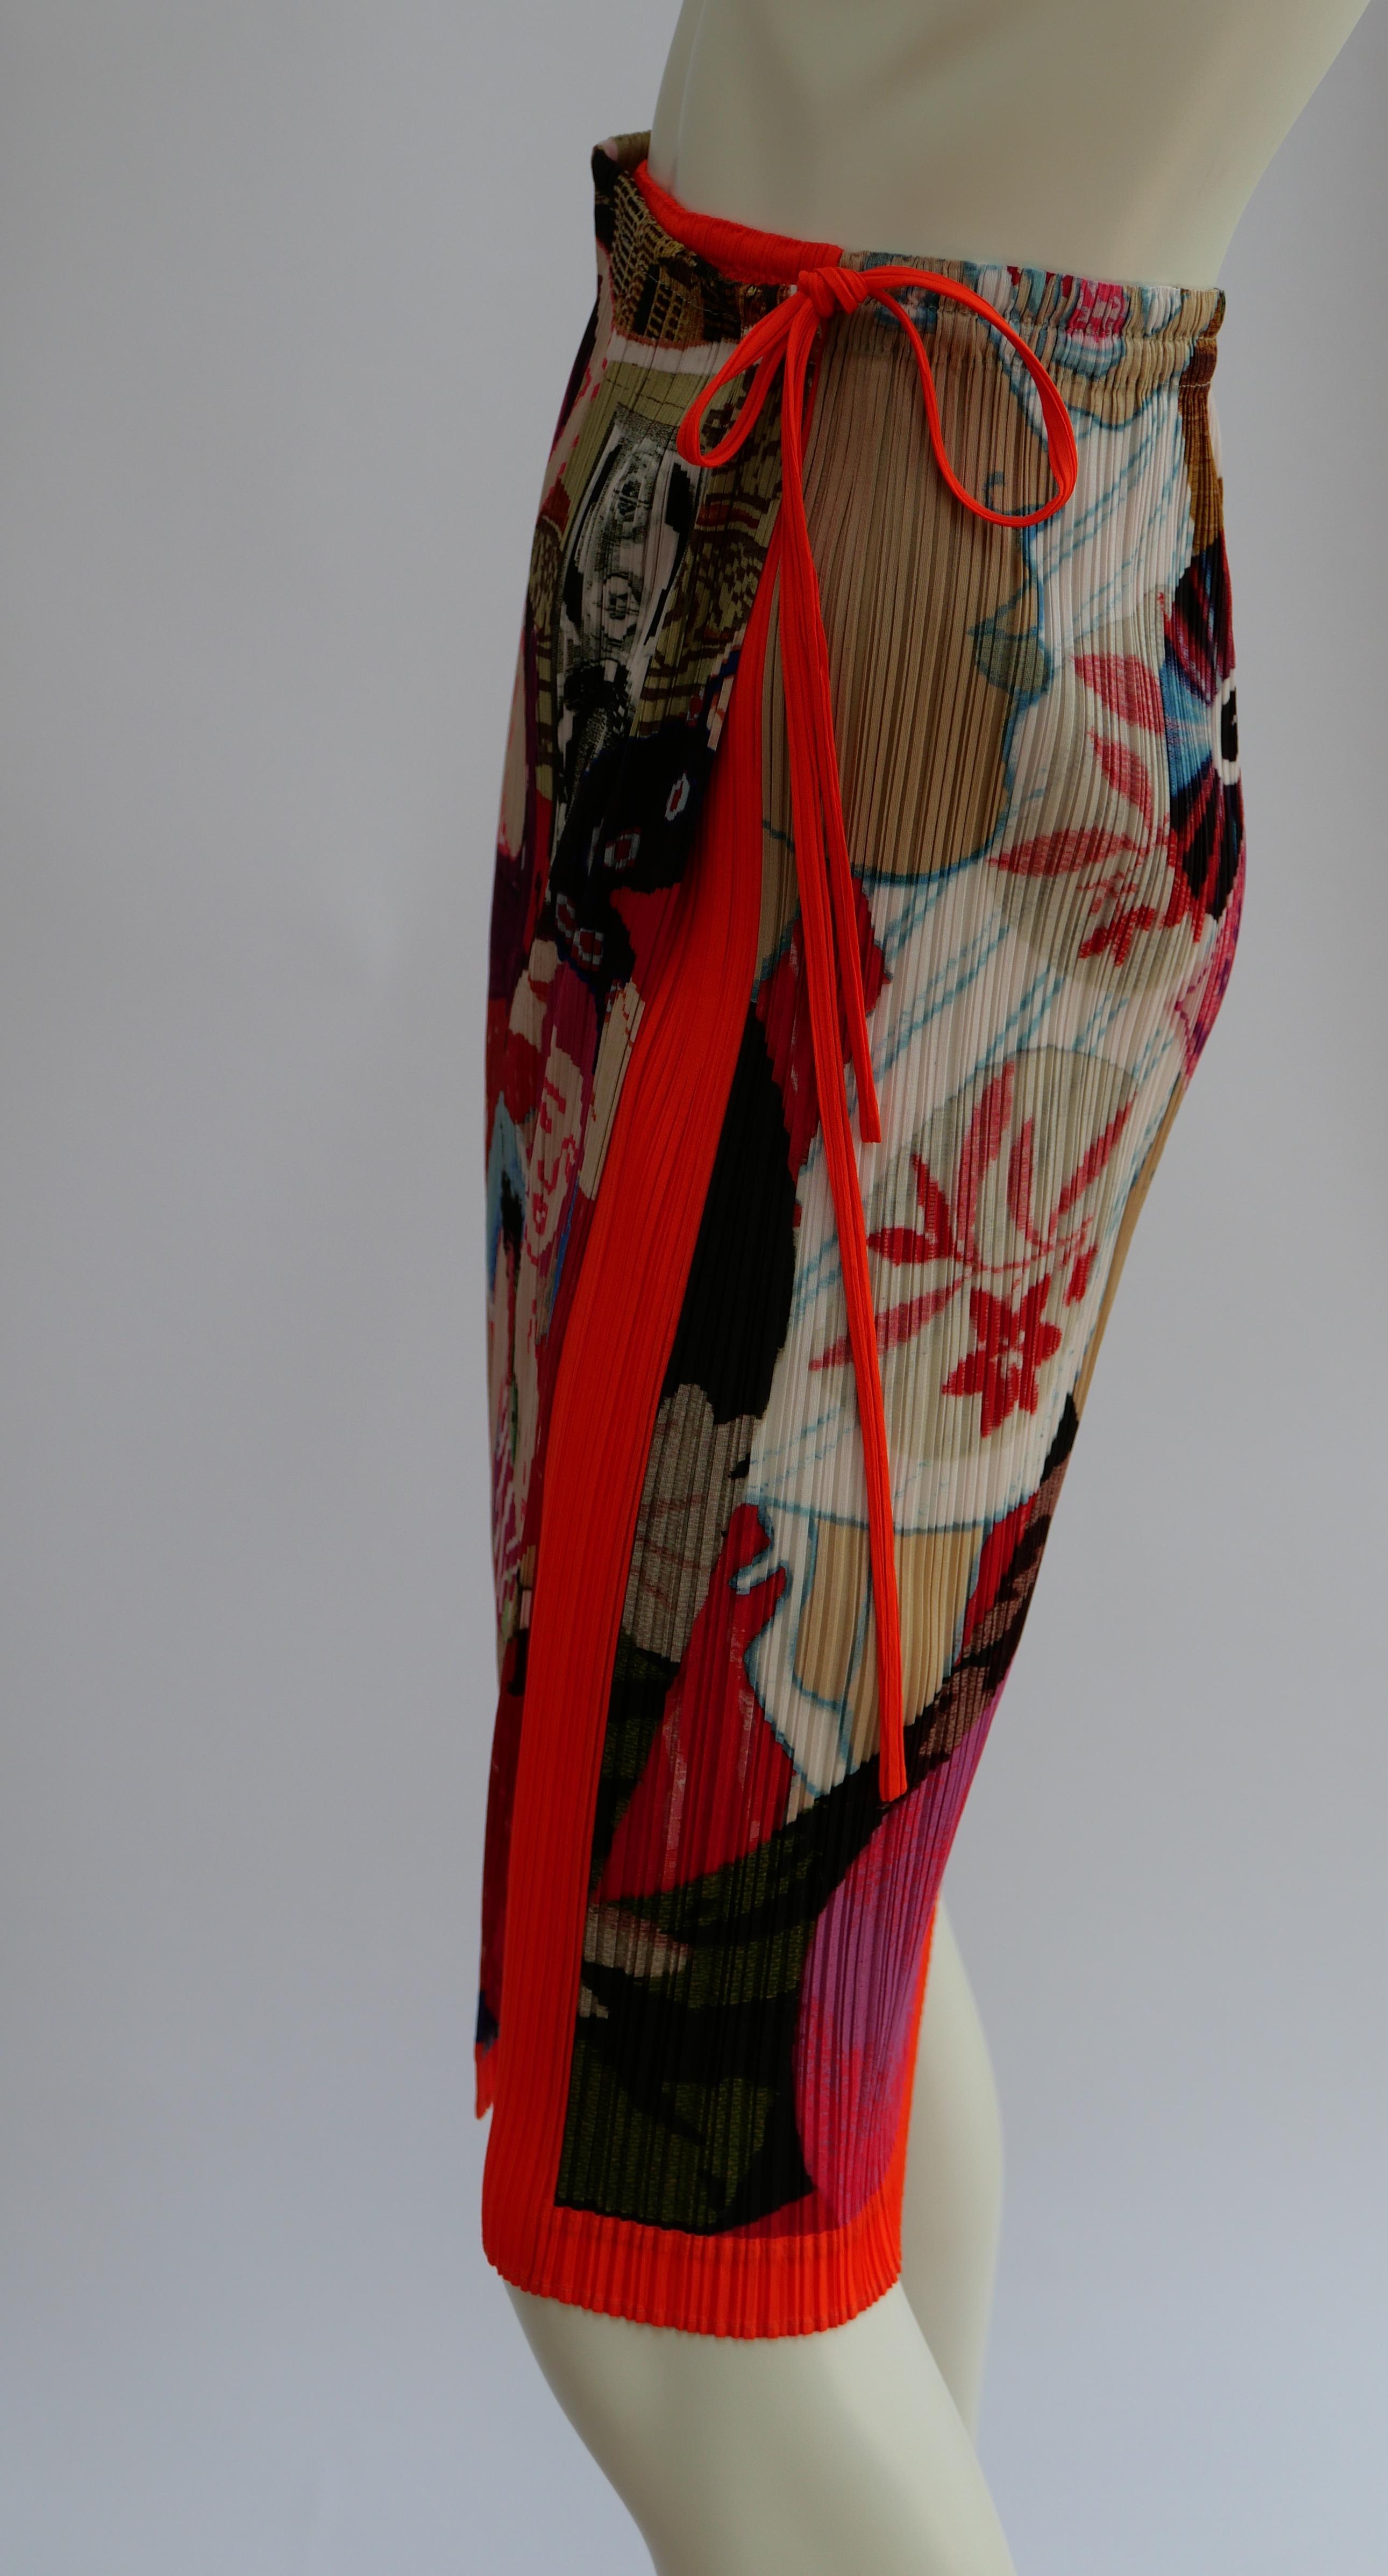  Issey Miyake Skirt With Art Illustration Print For Sale 3